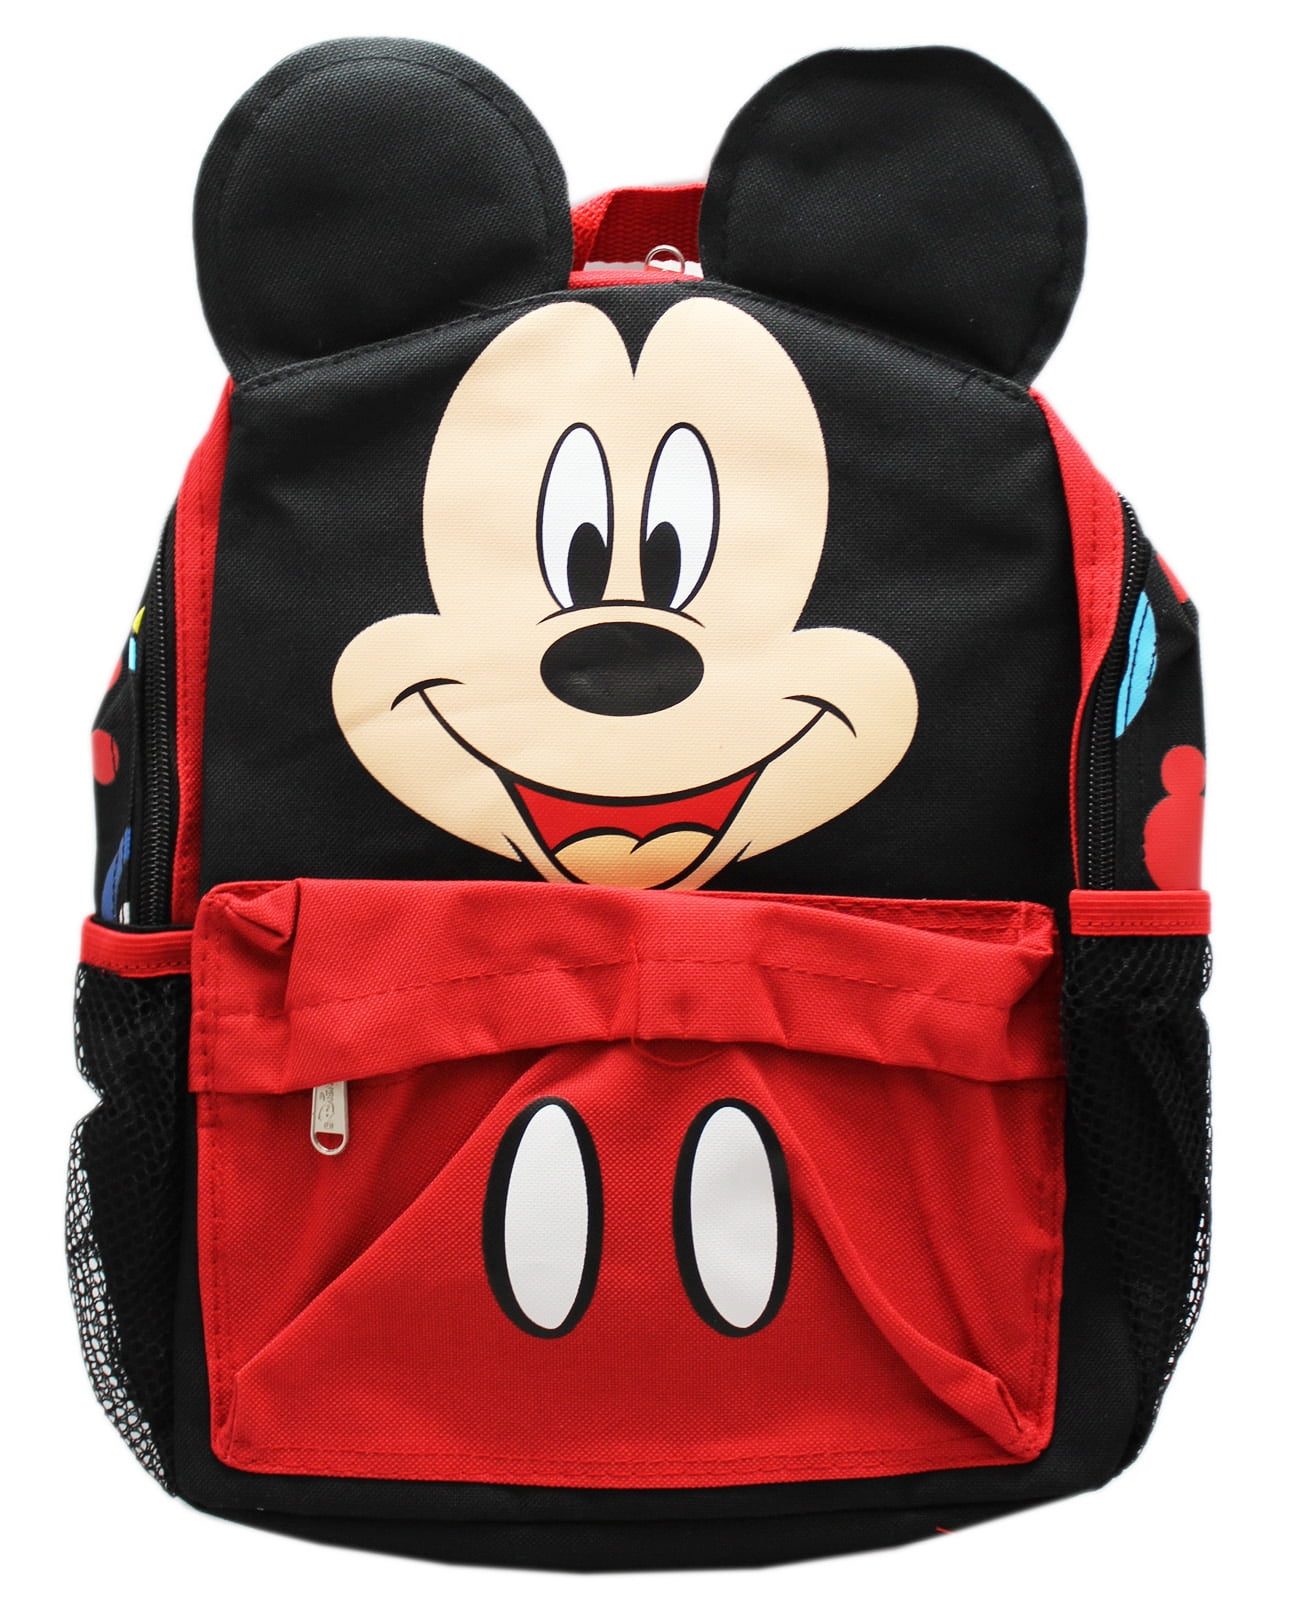 Disney Junior Mickey Mouse Backpack with Ears Cute For Kids Red Black 